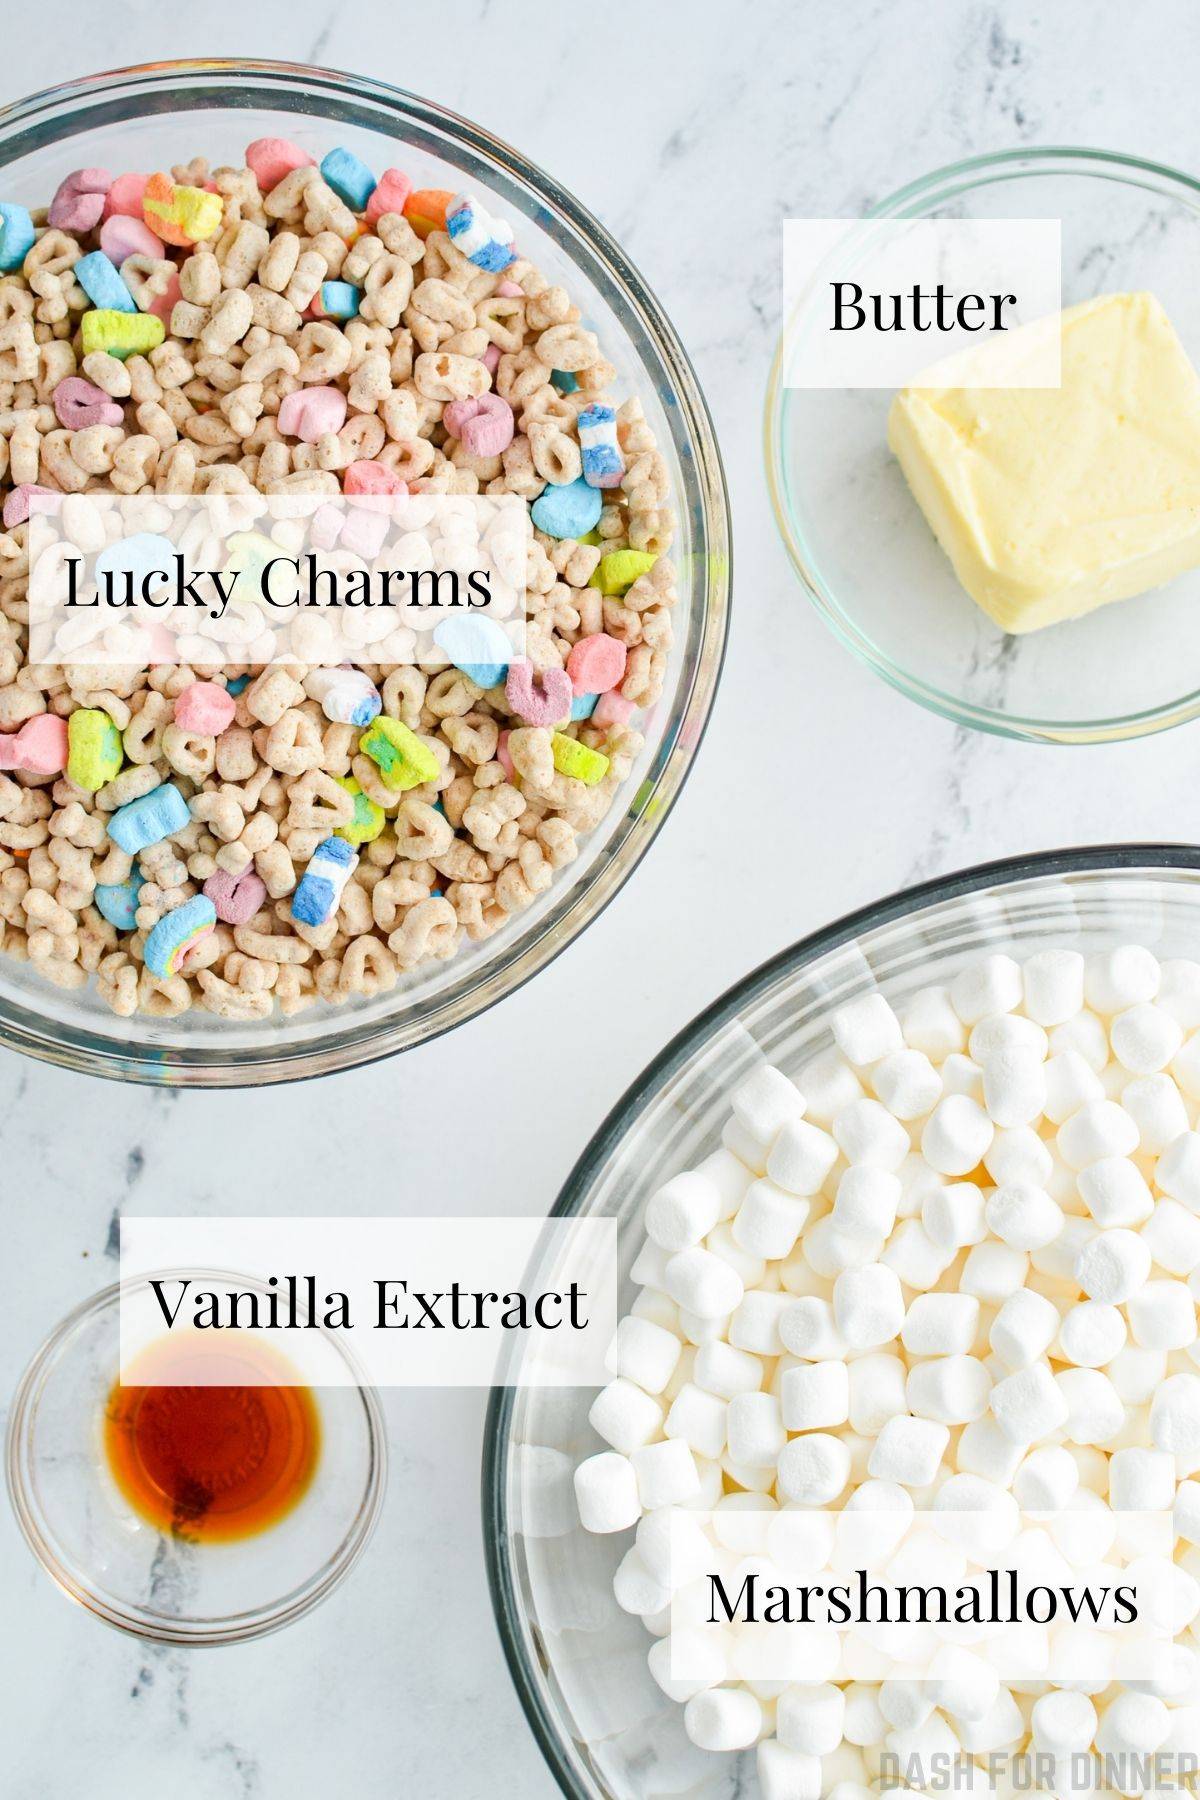 The ingredients needed to make lucky charms treats: marshmallows, lucky charms, butter, vanilla extract.